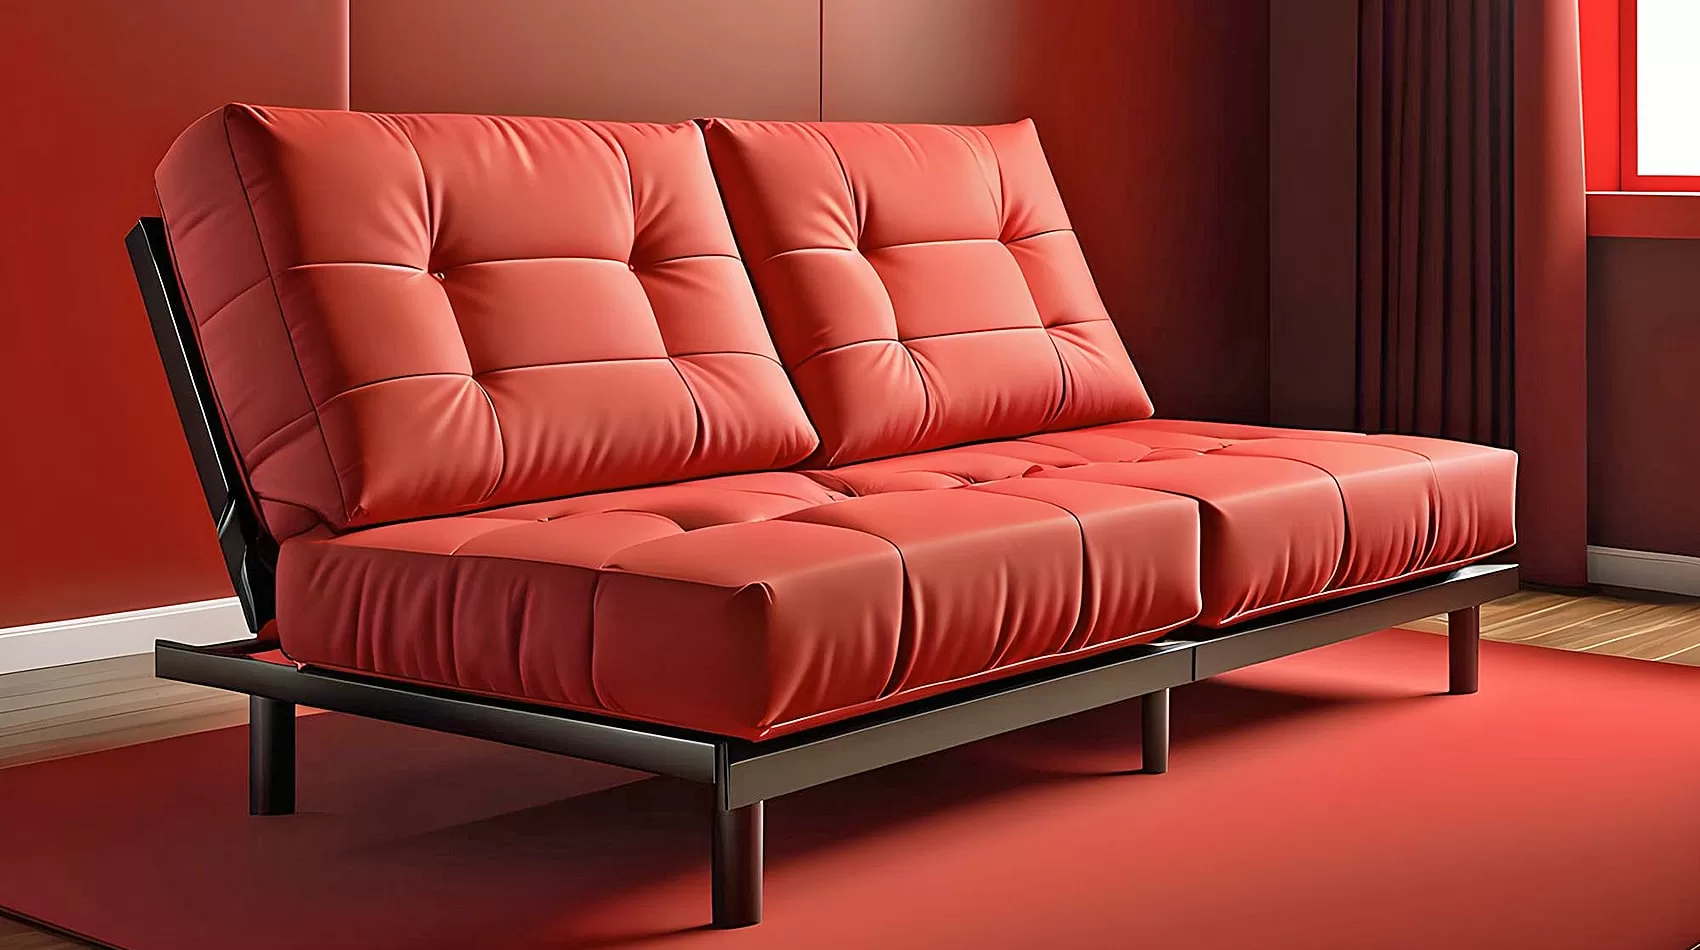 Red Sofa Sleeper | Red Sofa Bed: Style and Versatility Combined